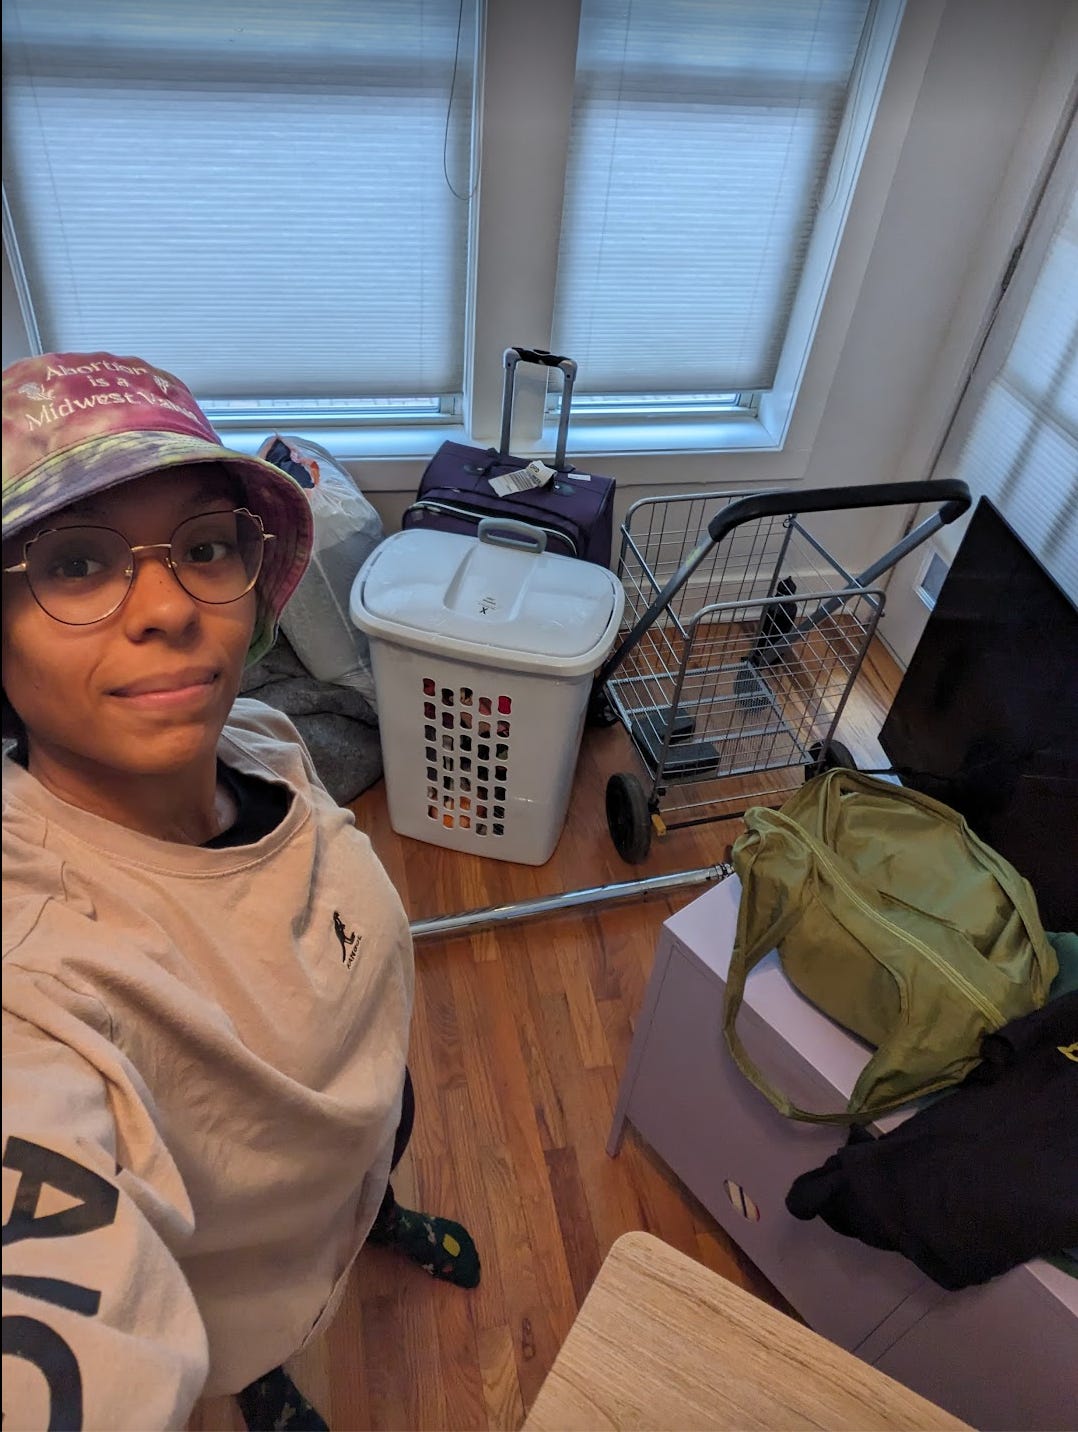 Nathalie takes a selfie of her new messy living room that thas bags, a laundry basket, cart and suitcases spread around. She is wearing a tie dyed bucket hat that says "Abortion is a Midwest Value"